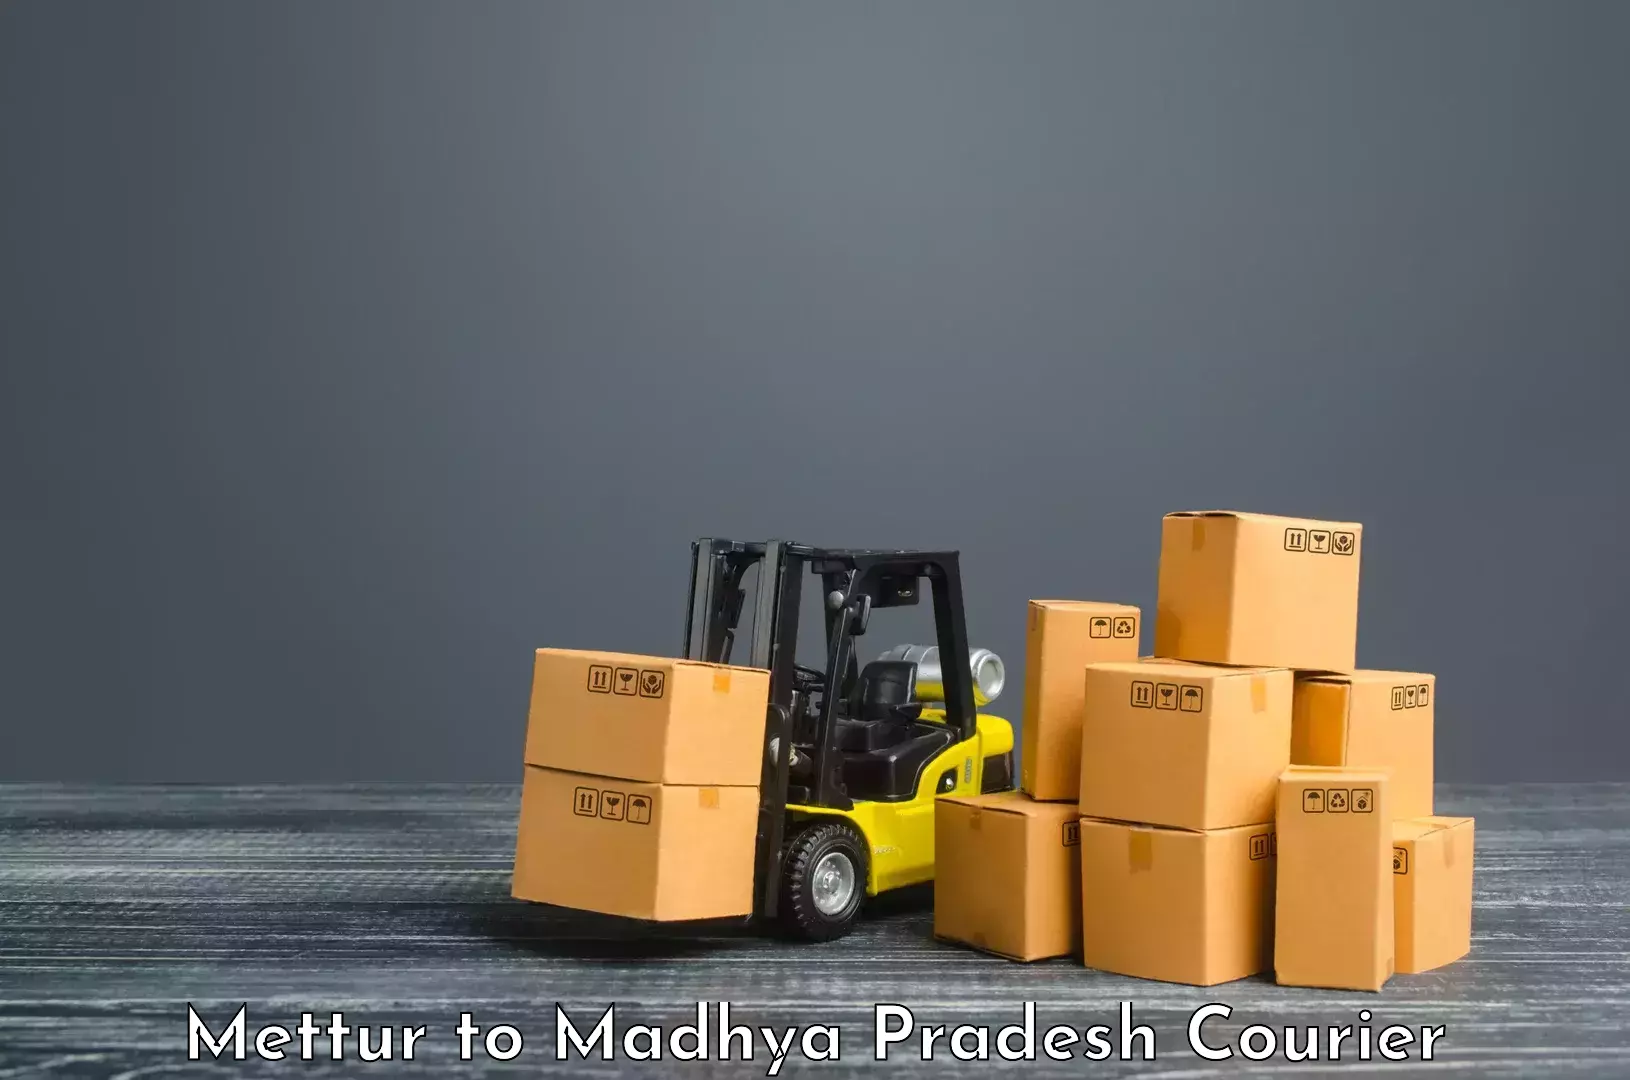 Same-day delivery solutions Mettur to Raipur Karchuliyan